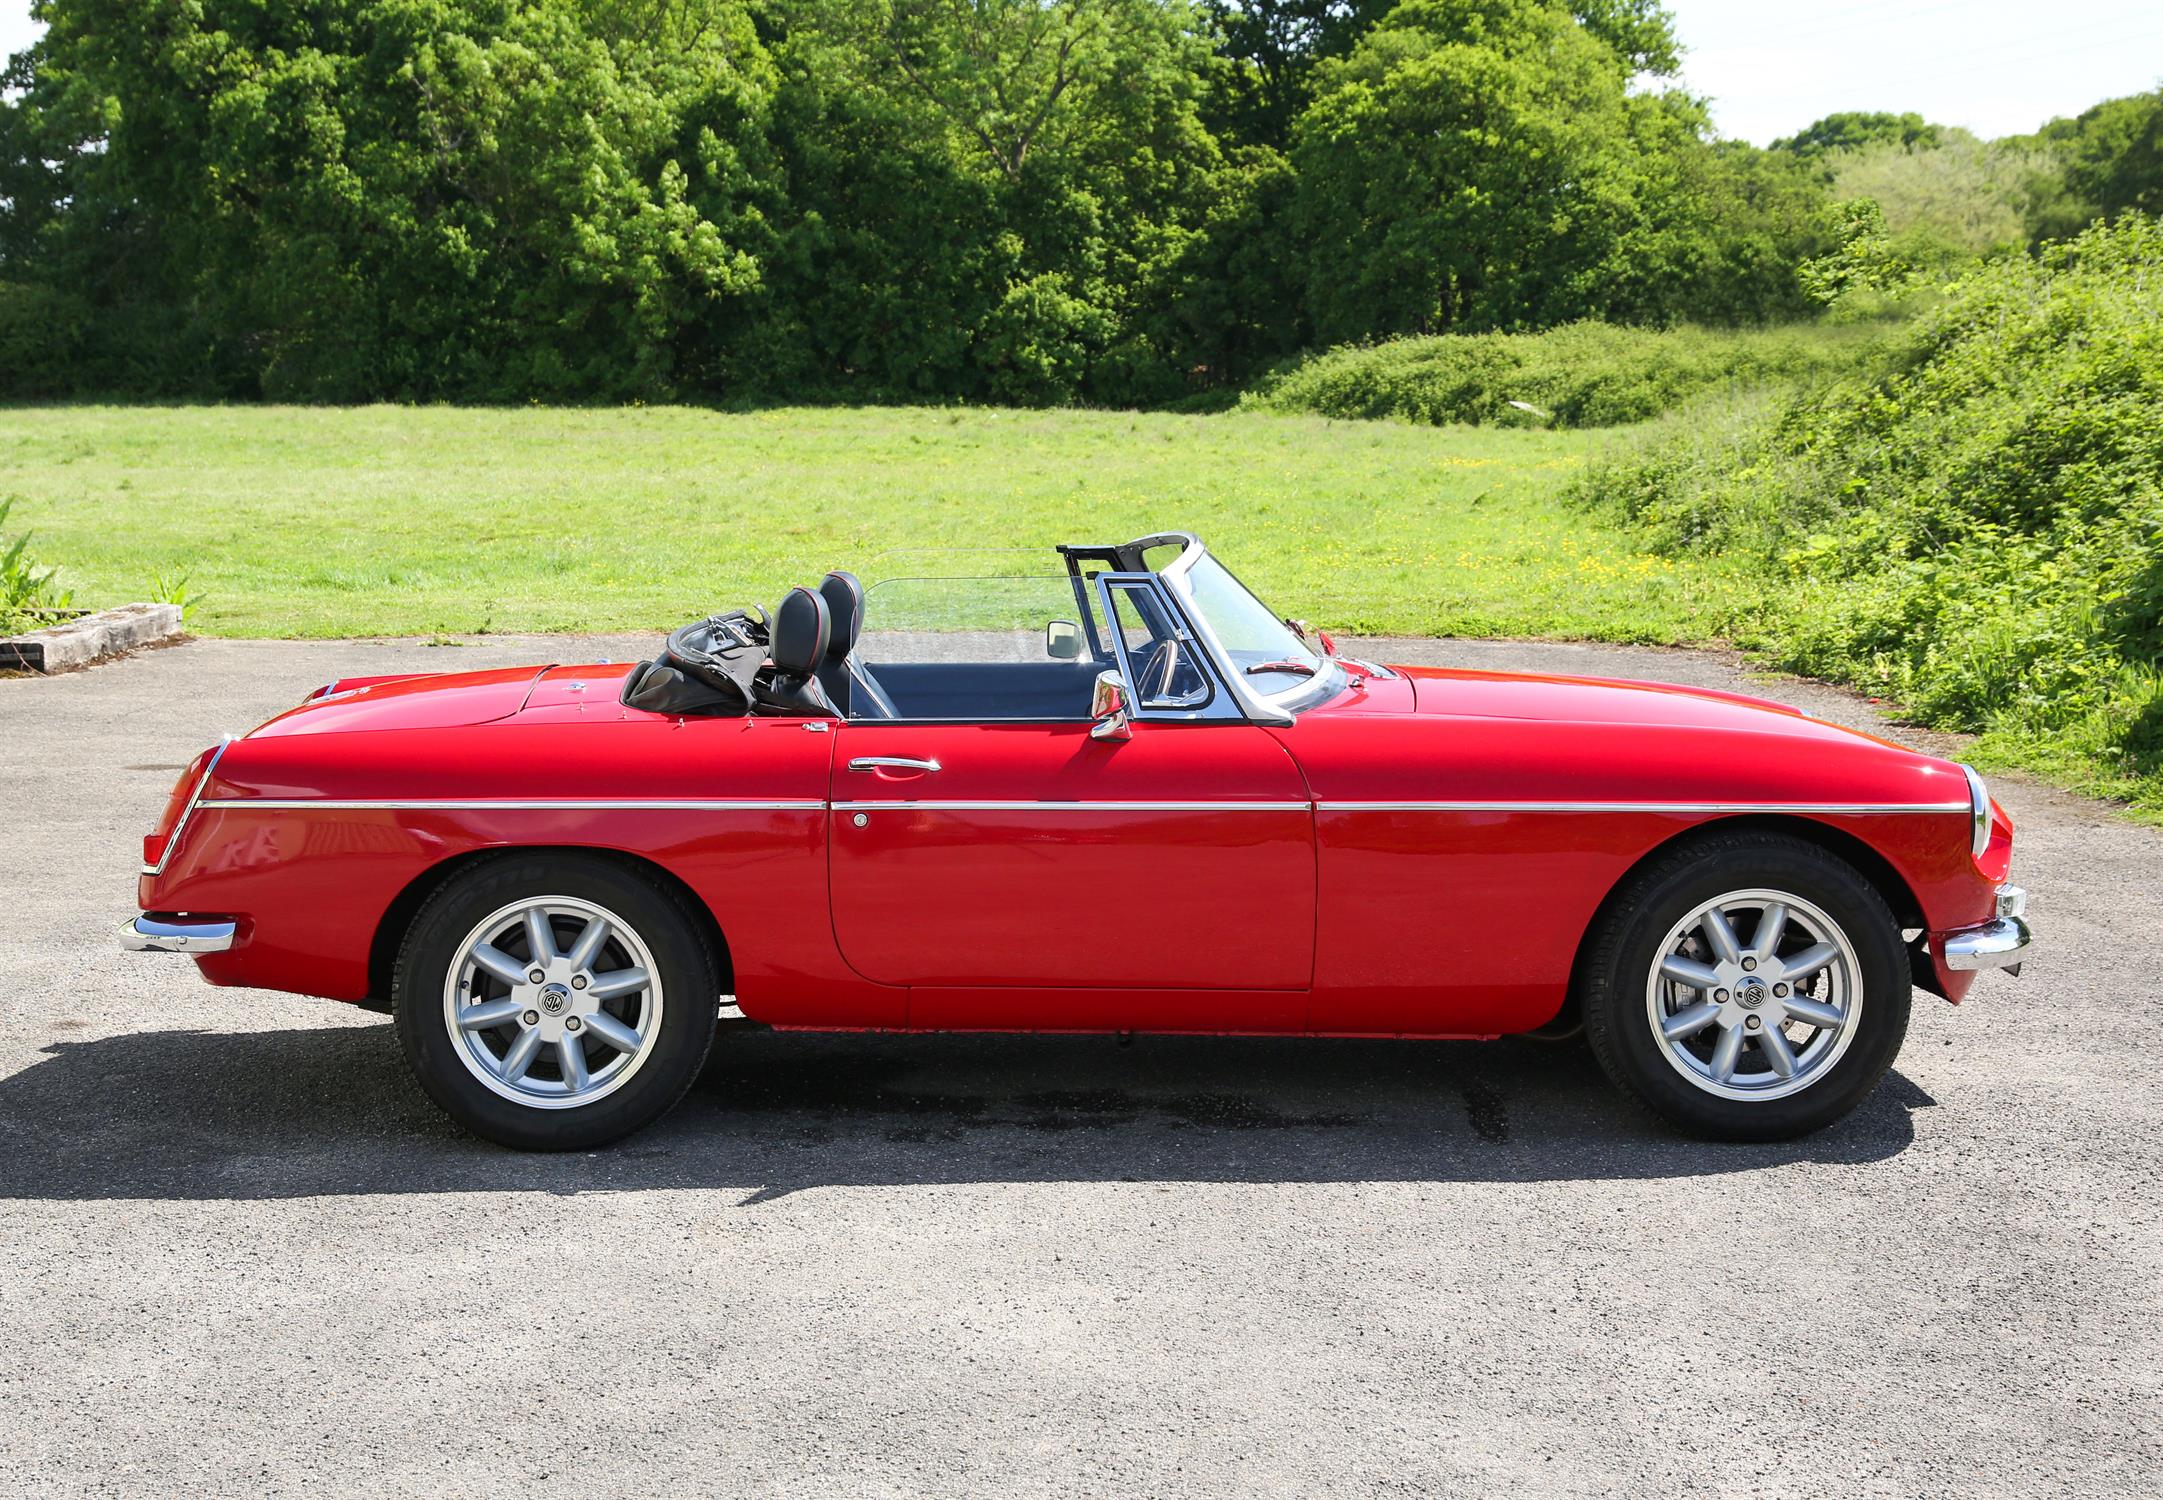 1968 MGB. Registration number LCD 365F - Fully rebuilt in 1997, with major refurbishment in 2019 - Image 2 of 6